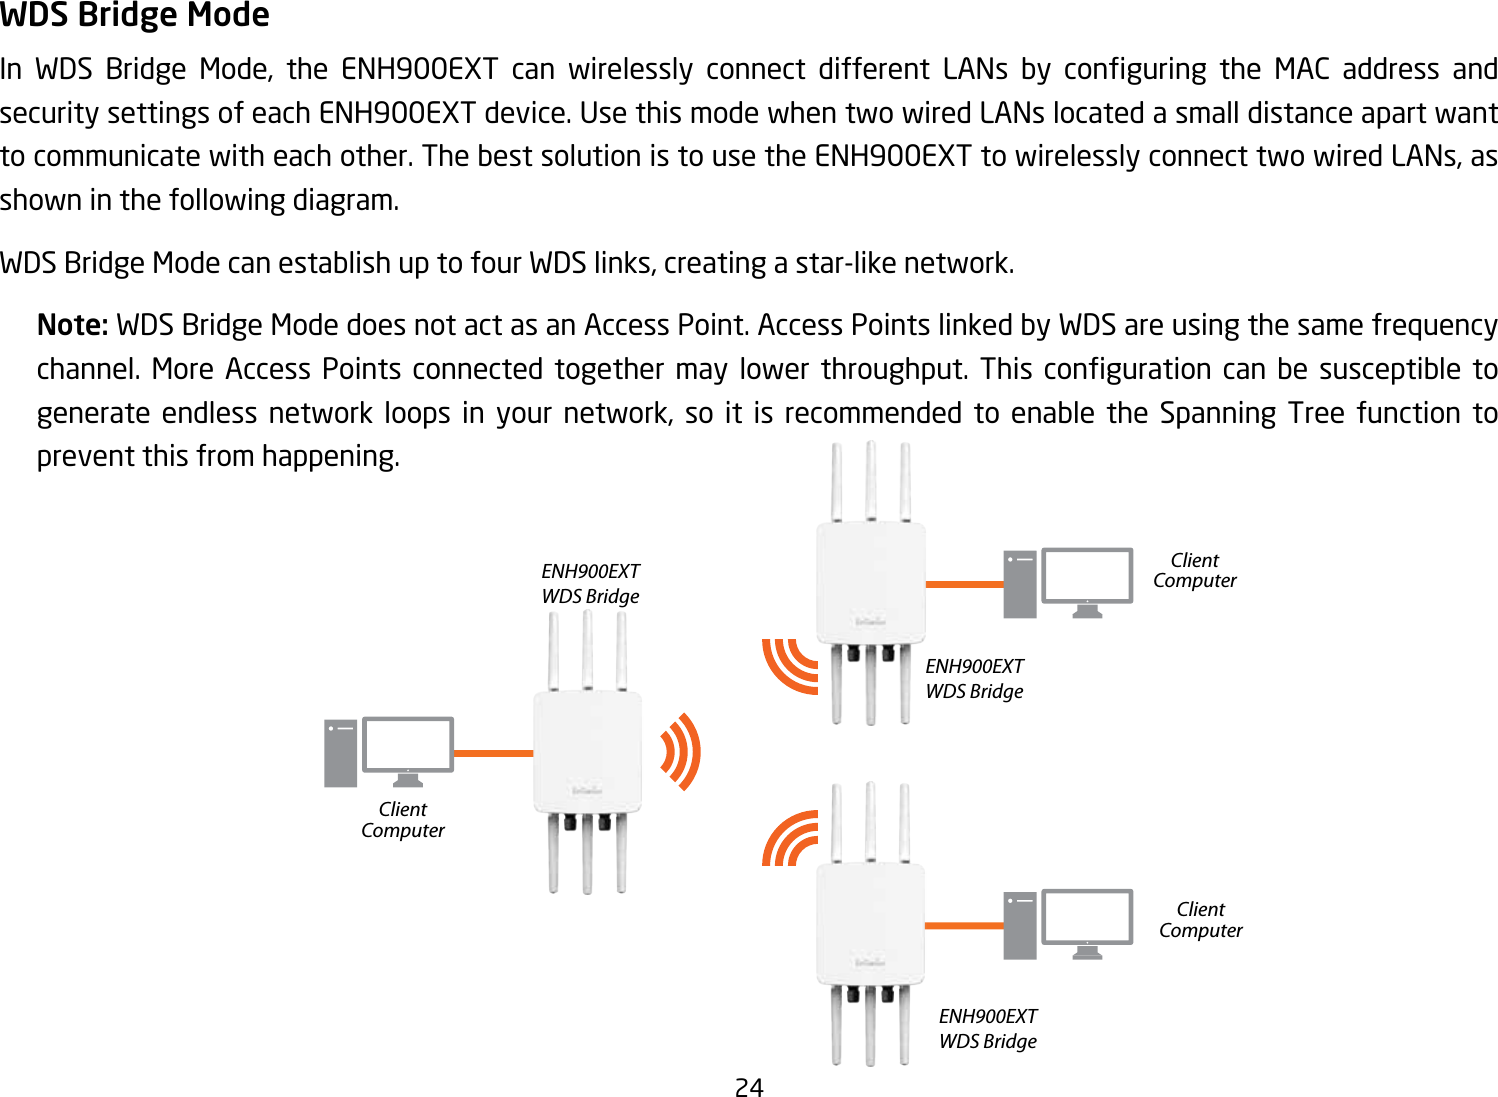 24WDS Bridge ModeIn WDS Bridge Mode, the ENH900EXT can wirelessly connect different LANs by conguring the MAC address andsecuritysettingsofeachENH900EXTdevice.UsethismodewhentwowiredLANslocatedasmalldistanceapartwantto communicate with each other. The best solution is to use the ENH900EXT to wirelessly connect two wired LANs, as shown in the following diagram. WDS Bridge Mode can establish up to four WDS links, creating a star-like network. Note: WDS Bridge Mode does not act as an Access Point. Access Points linked by WDS are using the same frequency channel. More Access Points connected together may lower throughput. This conguration can be susceptible togenerate endless network loops in your network, so it is recommended to enable the Spanning Tree function to prevent this from happening.ENH900EXTWDS BridgeENH900EXTWDS BridgeENH900EXTWDS BridgeClientComputerClientComputerClientComputer